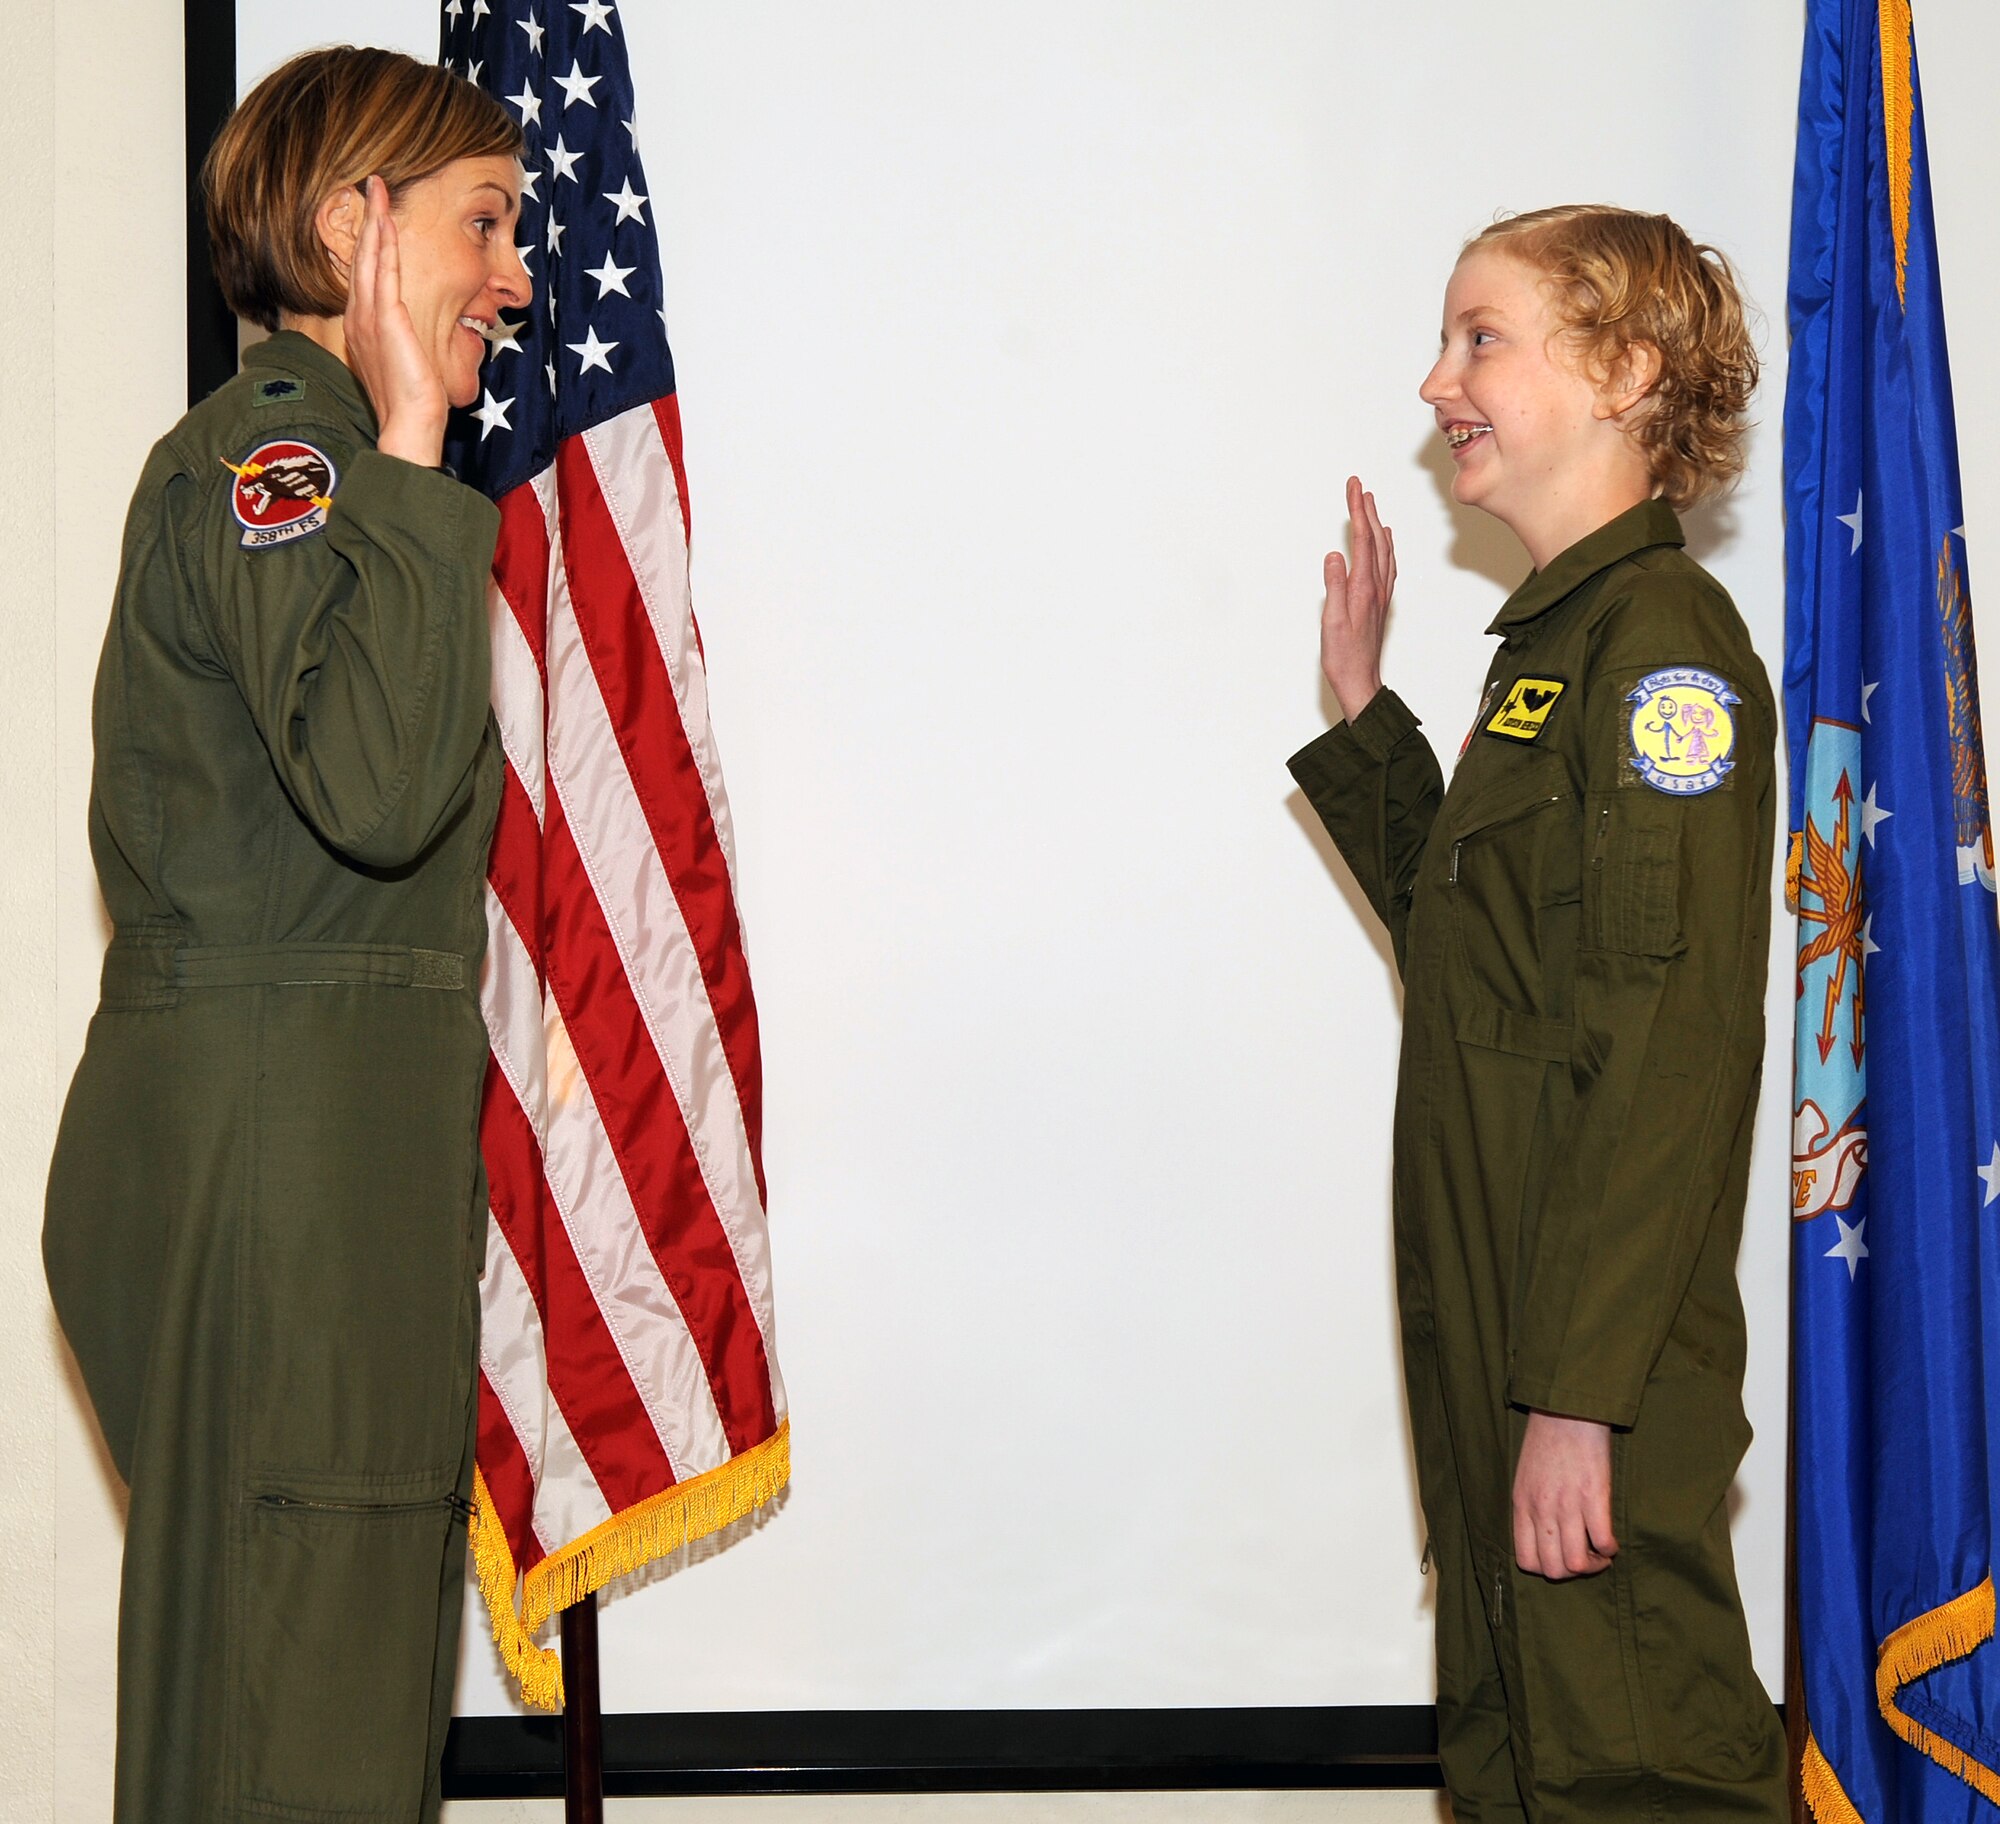 U.S. Air Force Lt. Col. Jennifer Short, 358th Fighter Squadron commander, swears in Addison Rerecich, a 13-year-old Tucsonan recovering from a double lung transplant, as part of the Pilot for a Day program at Davis-Monthan Air Force Base, Ariz. Feb. 21, 2013. The Pilot for a Day program begins with a brief "swearing in" ceremony at the host flying squadron, after which the child becomes an "honorary United States Air Force pilot". (U.S. Air Force photo by Senior Airman Brittany Dowdle)